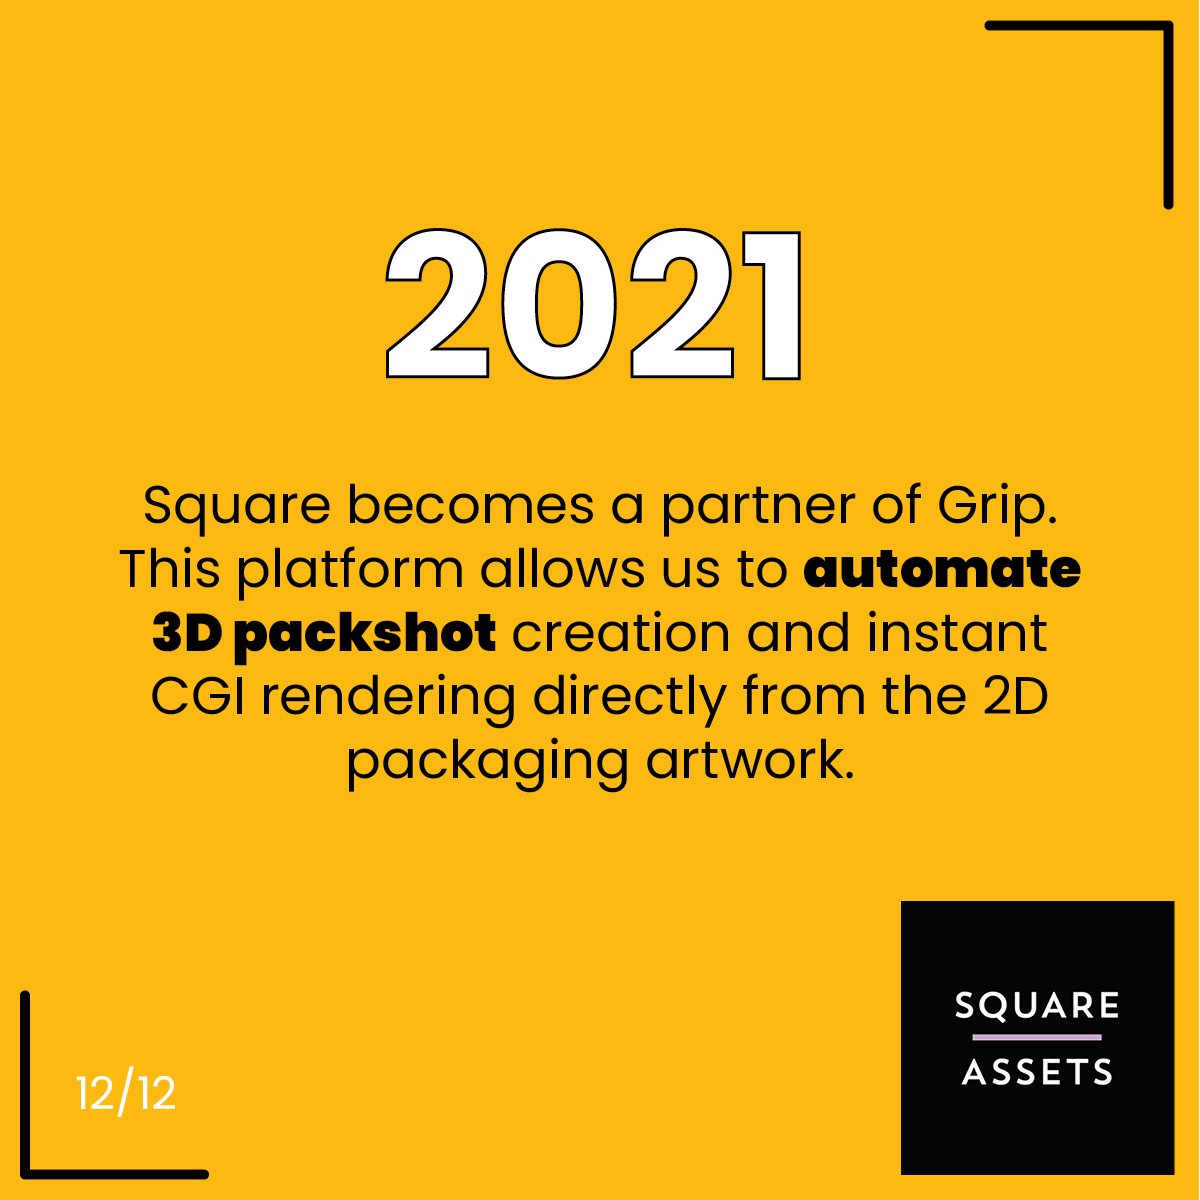 2021, Square becomes a partner of Grip. This platform allows us to automate 3D packshot creation and instant CGI rendering directly from the 2D packaging artwork.